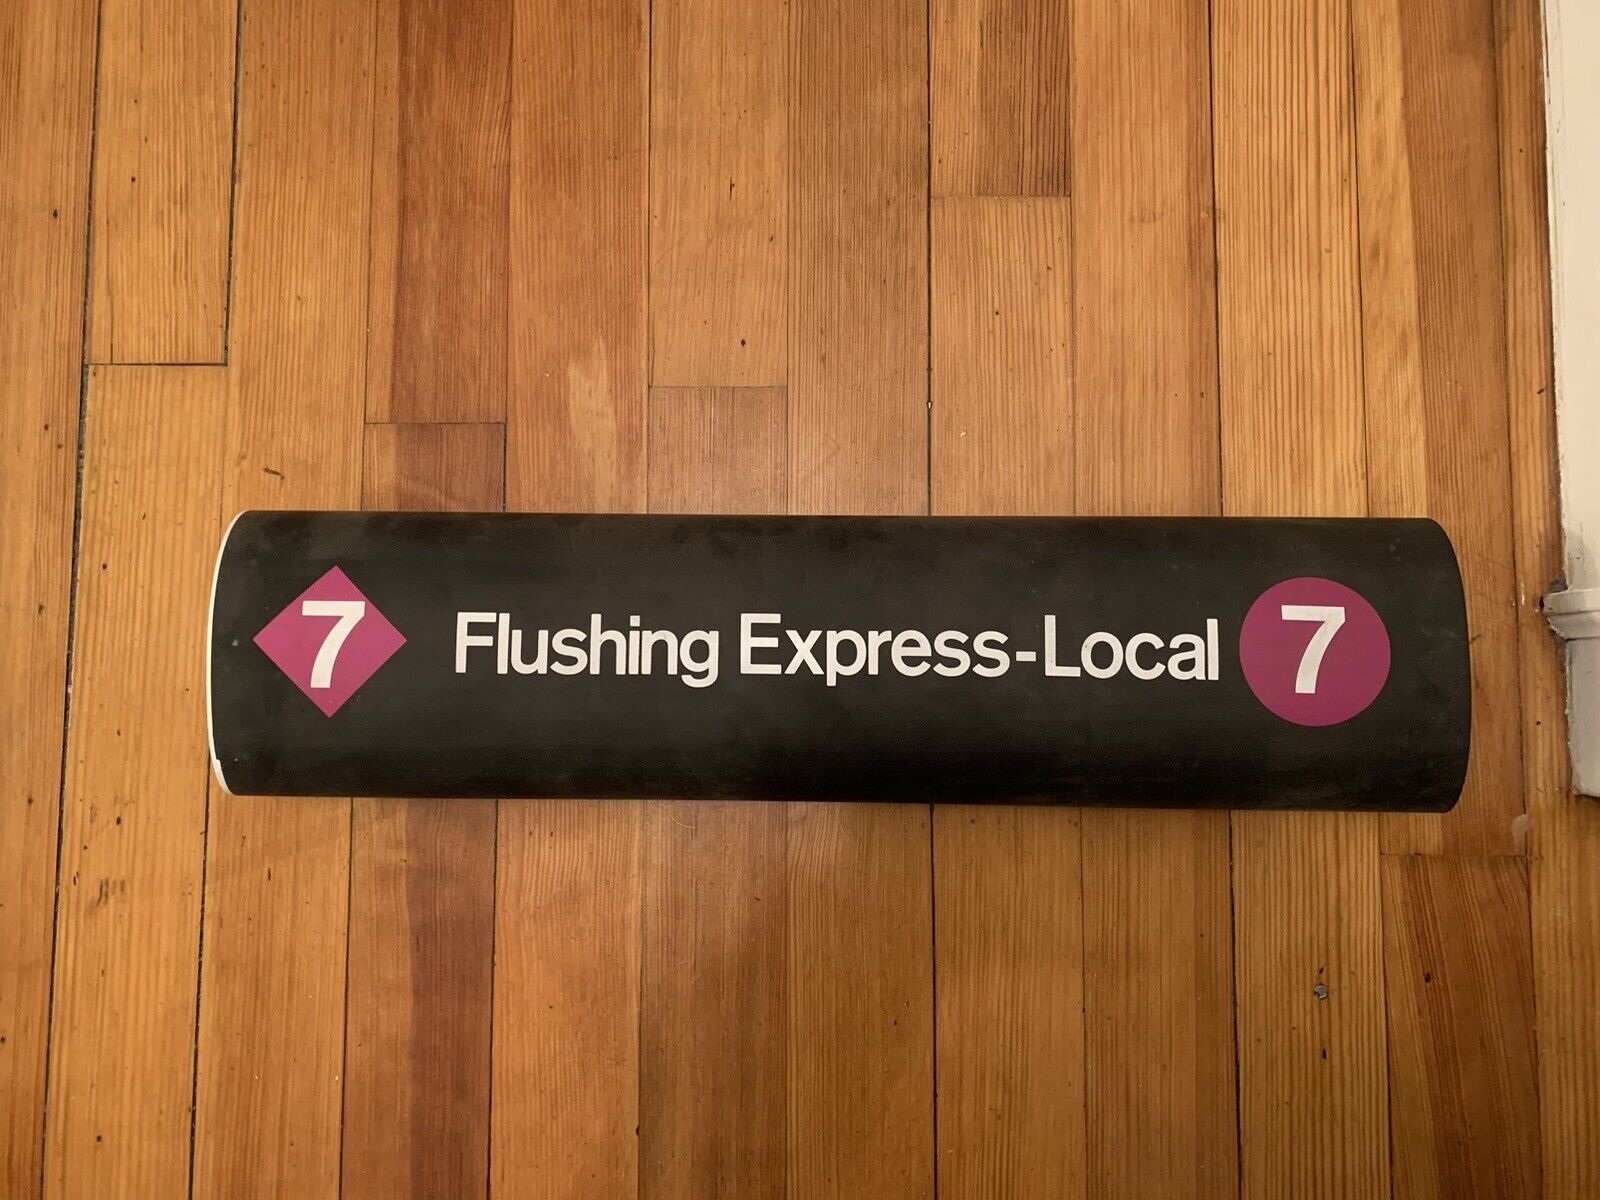 NY NYC SUBWAY ROLL SIGN #7 LINE TRAIN R21 1 LINE FLUSHING QUEENS LOCAL EXPRESS